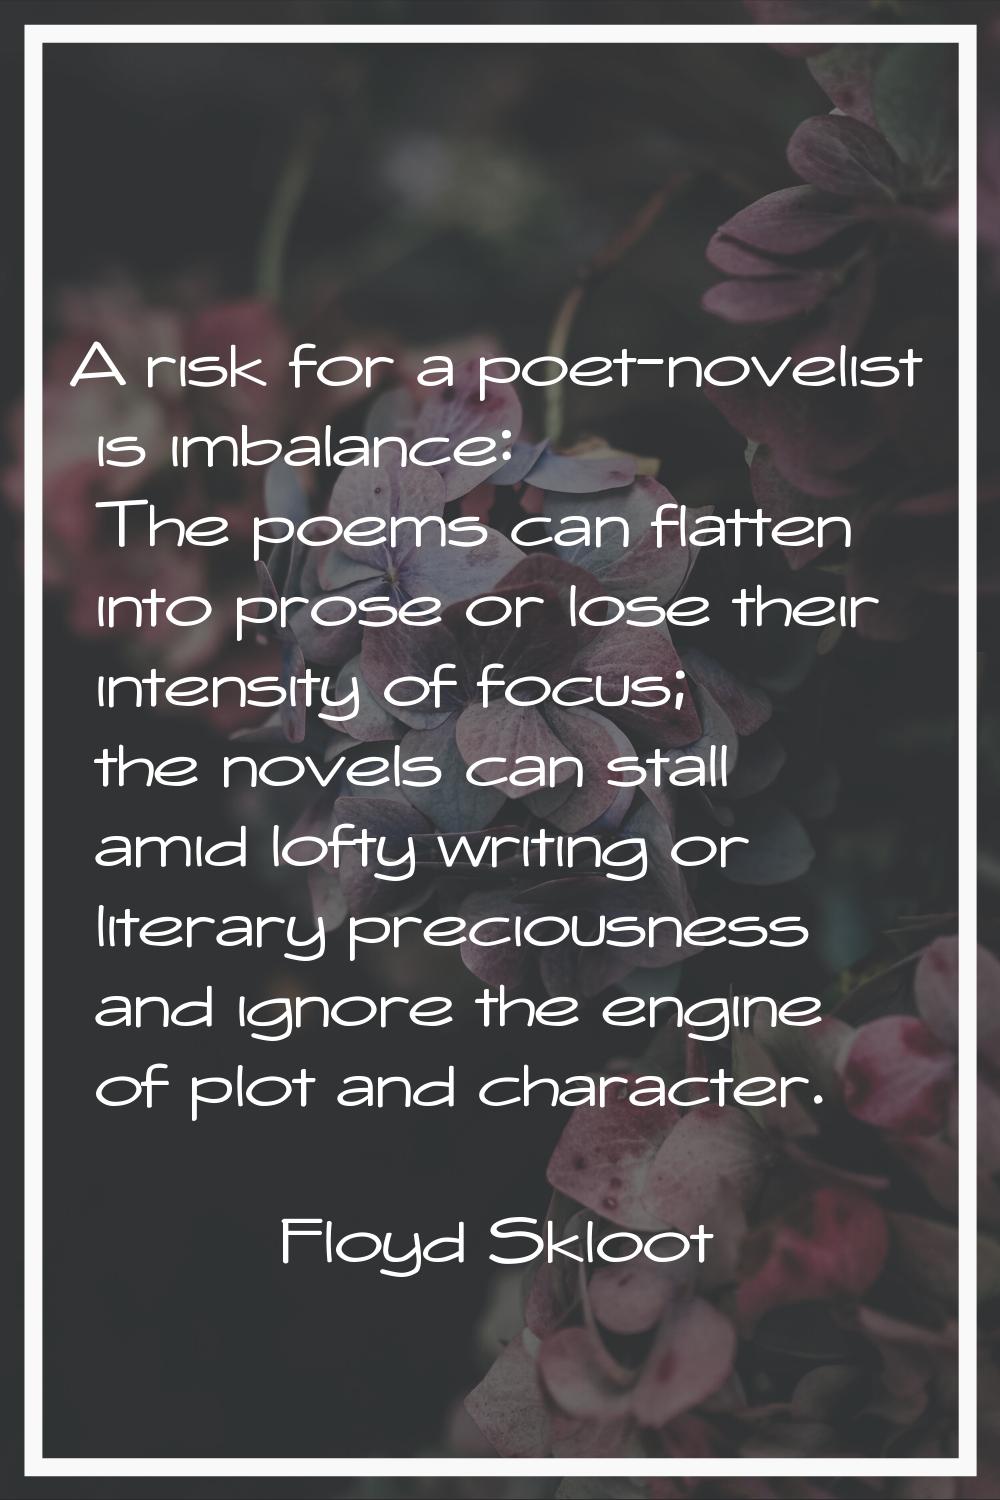 A risk for a poet-novelist is imbalance: The poems can flatten into prose or lose their intensity o